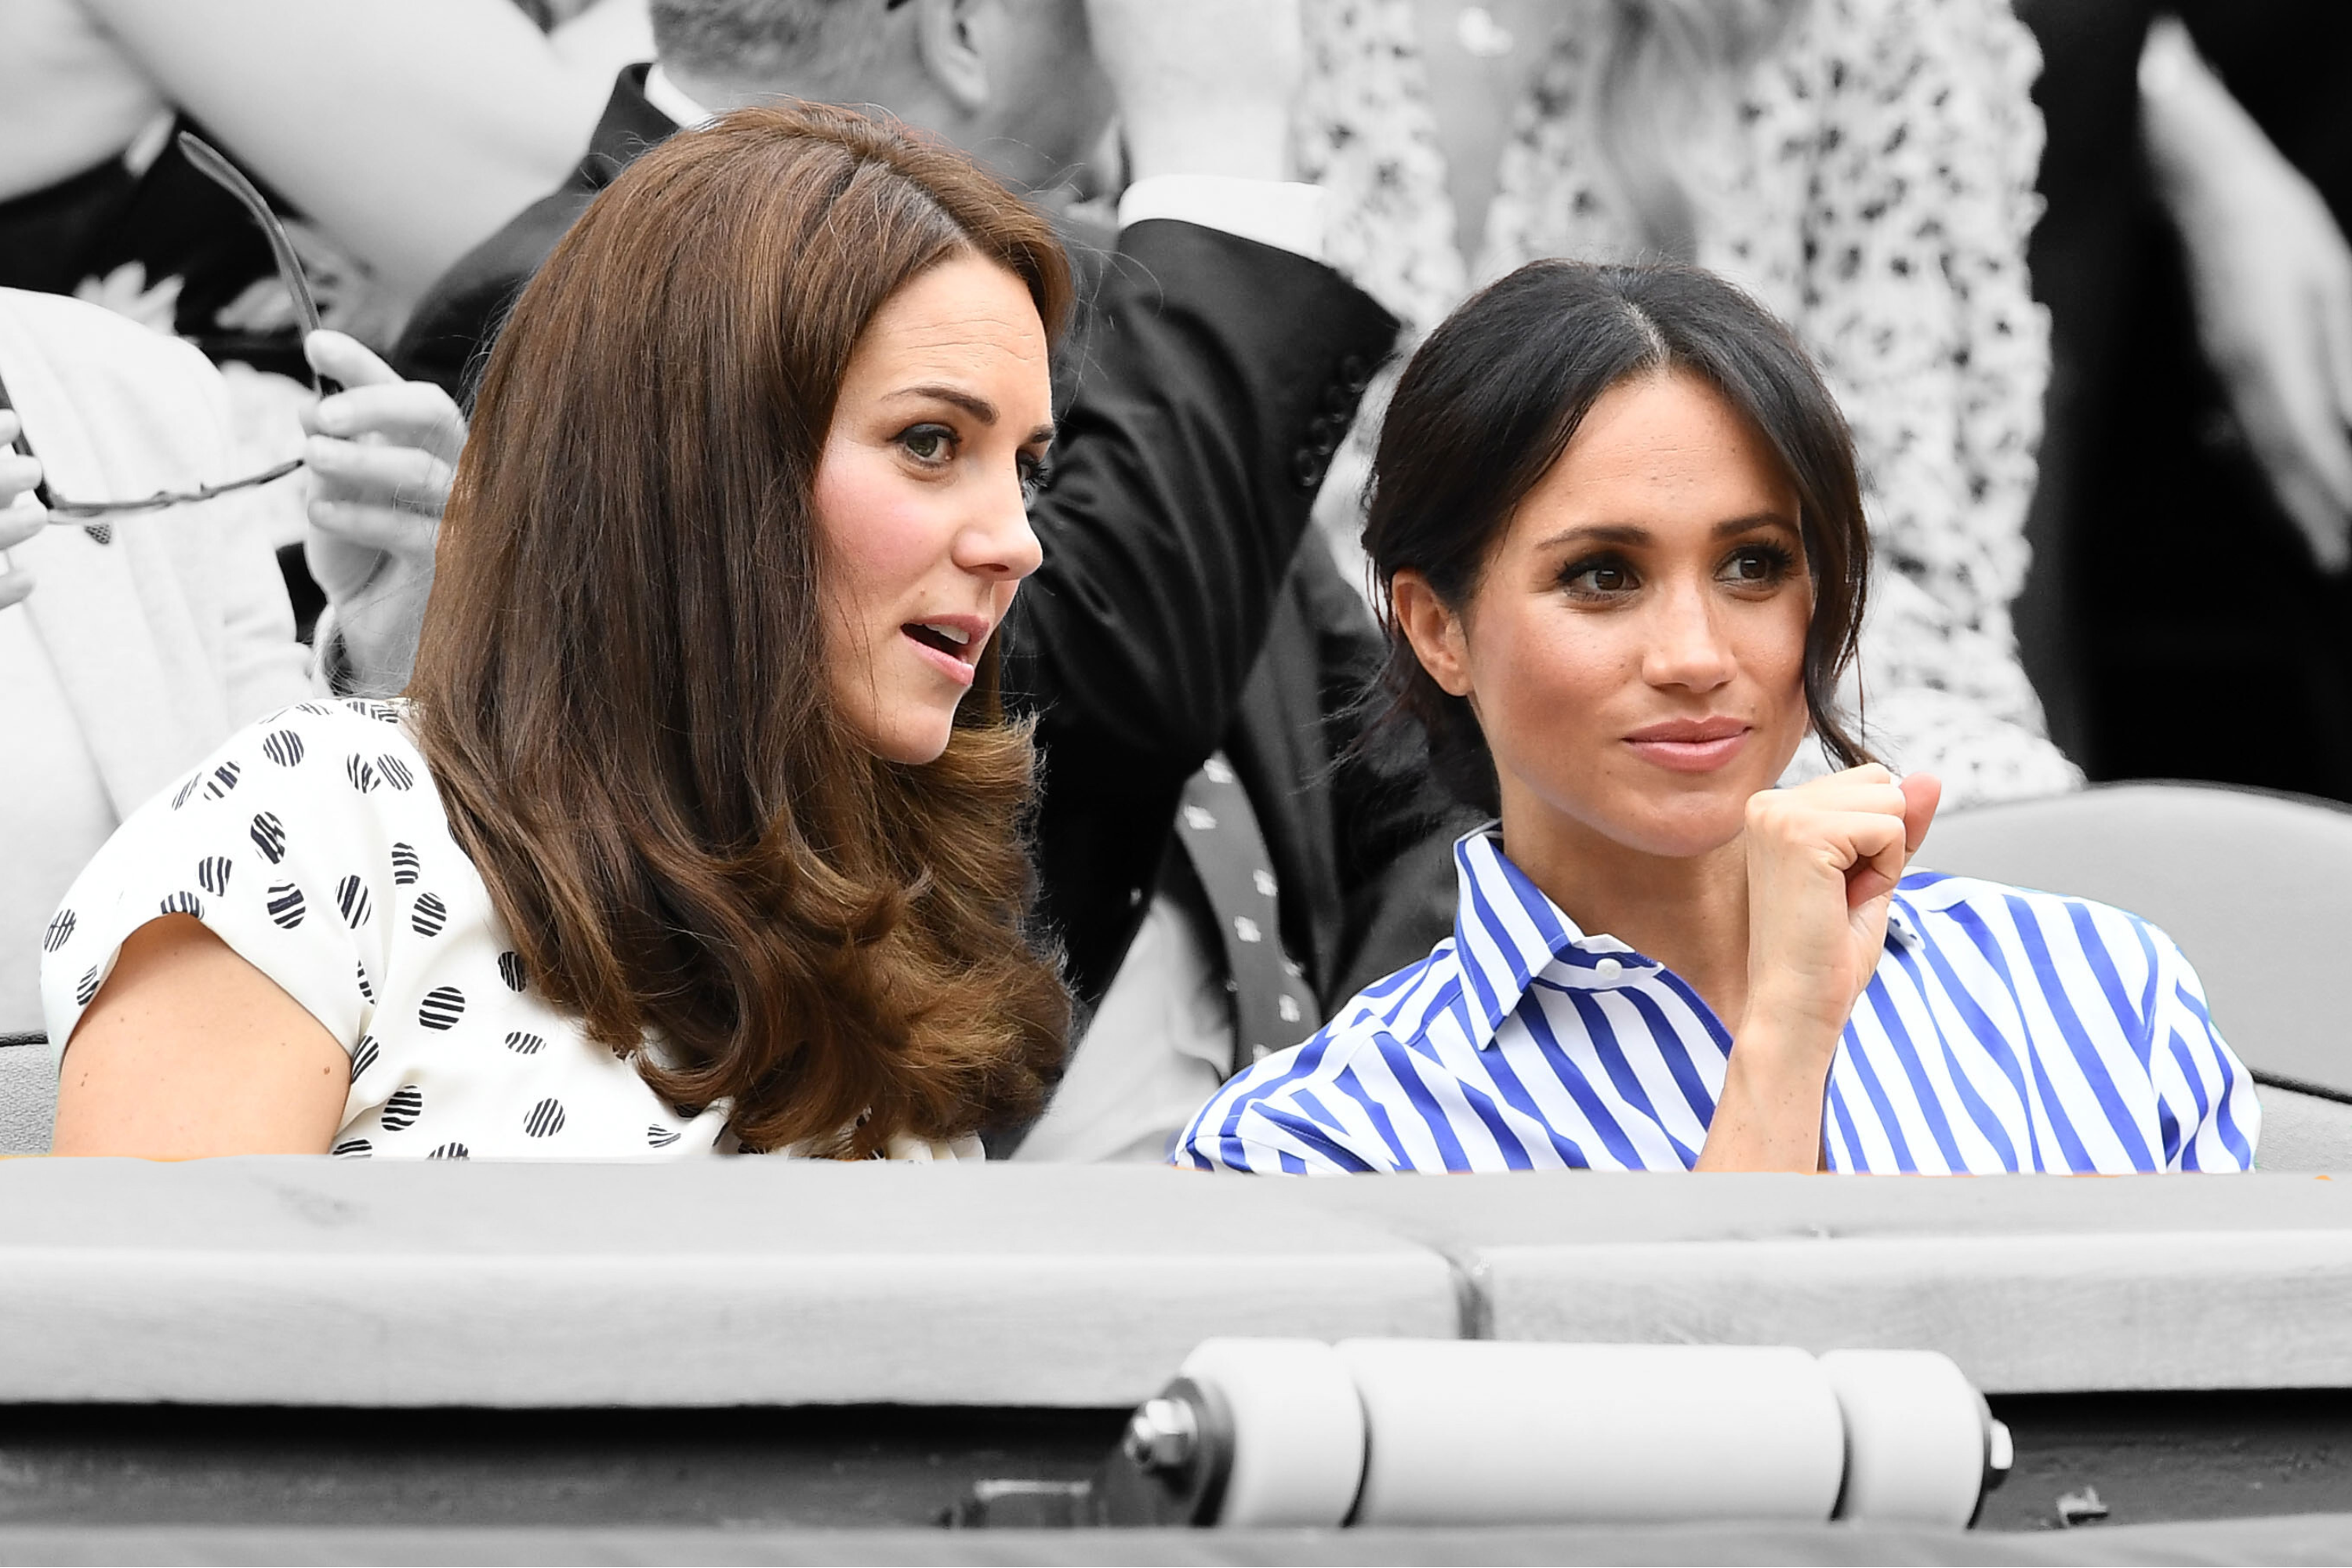 Princess Kate and Meghan Markle’s relationship in photos